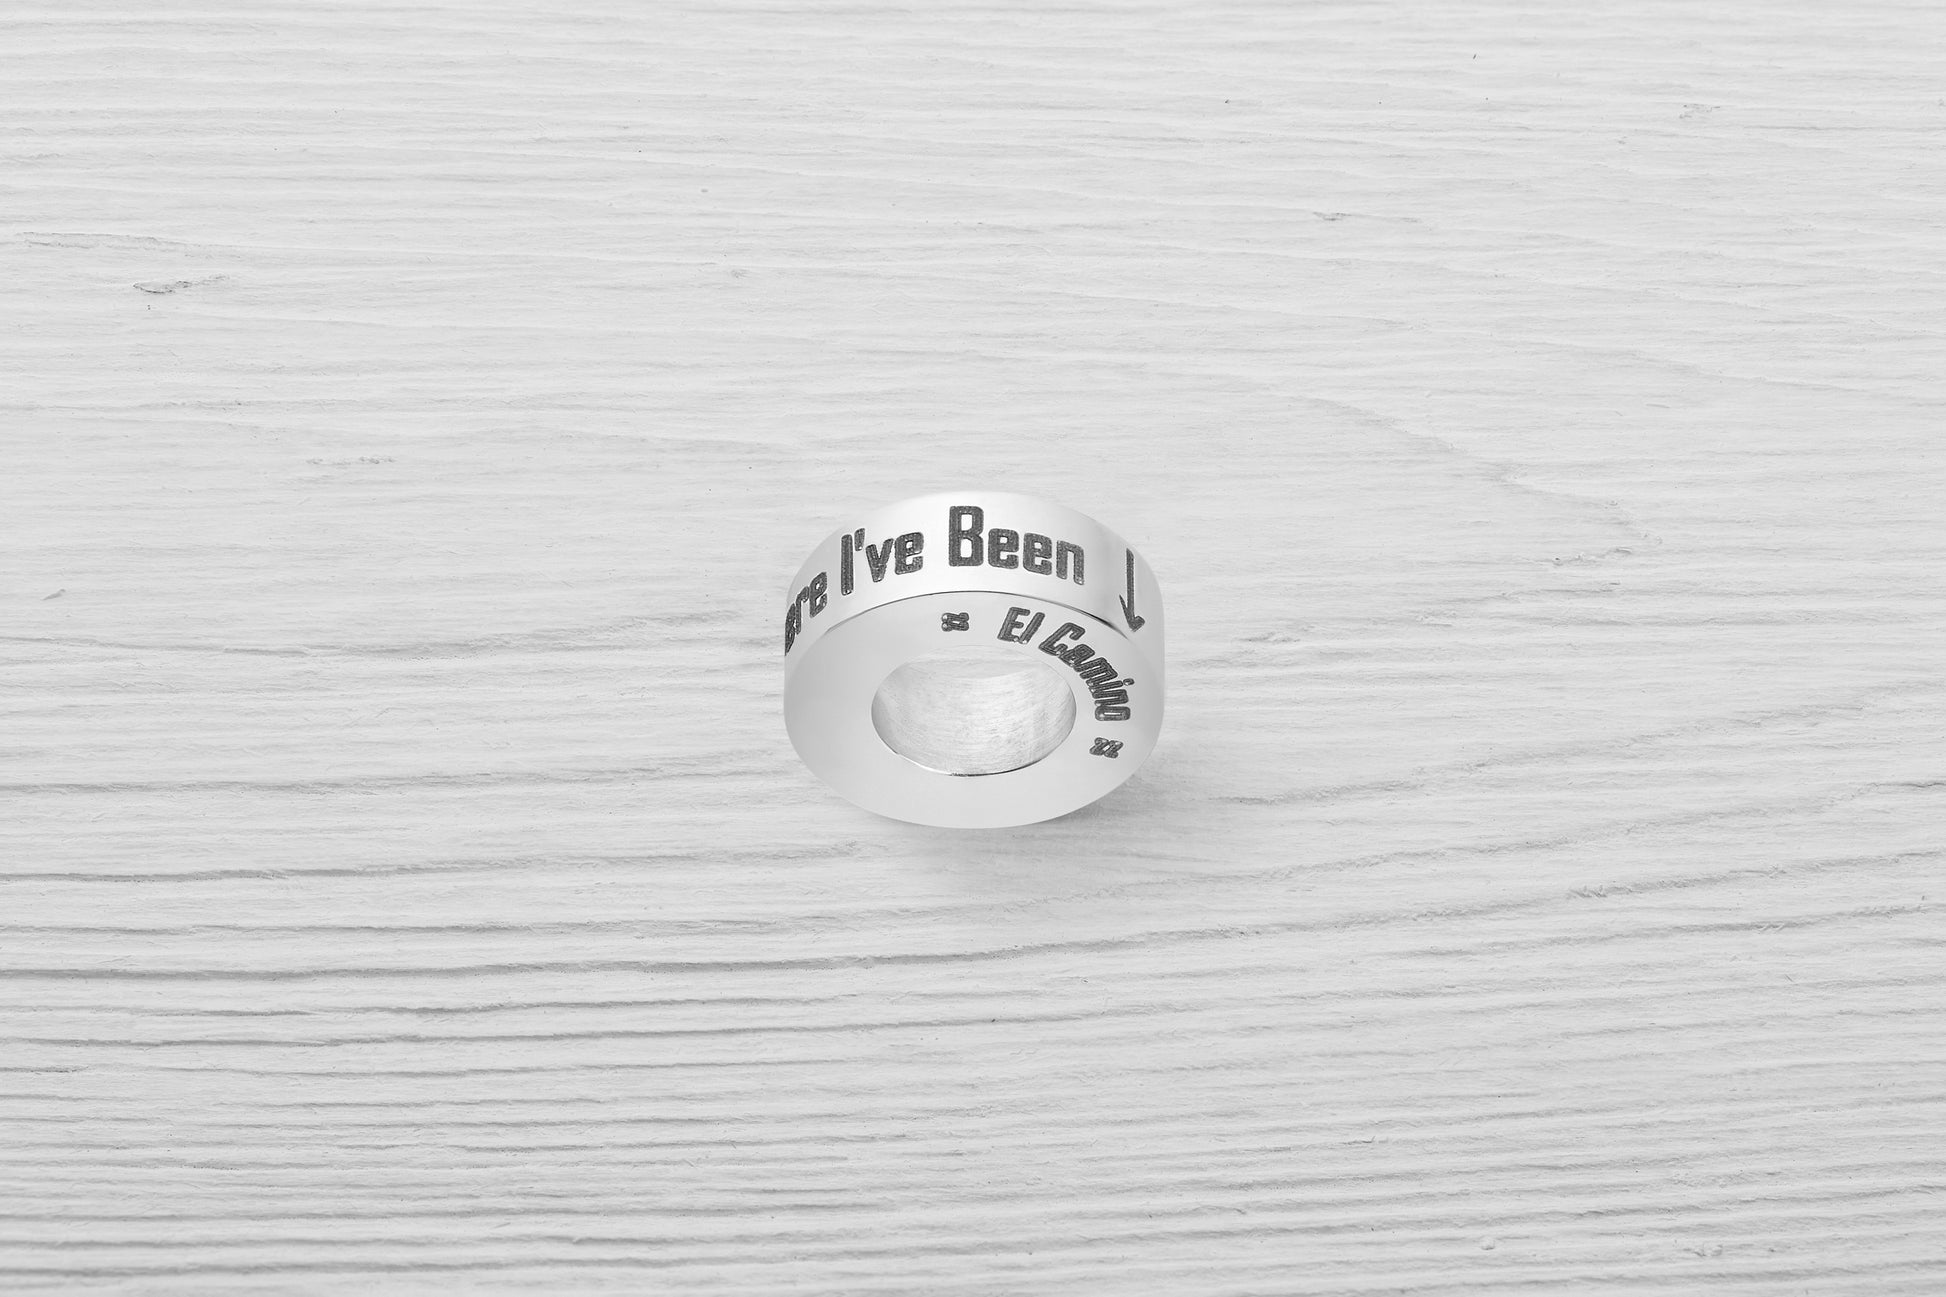 "Where I've Been" (Down Arrow) Divider Travel Charm Bead